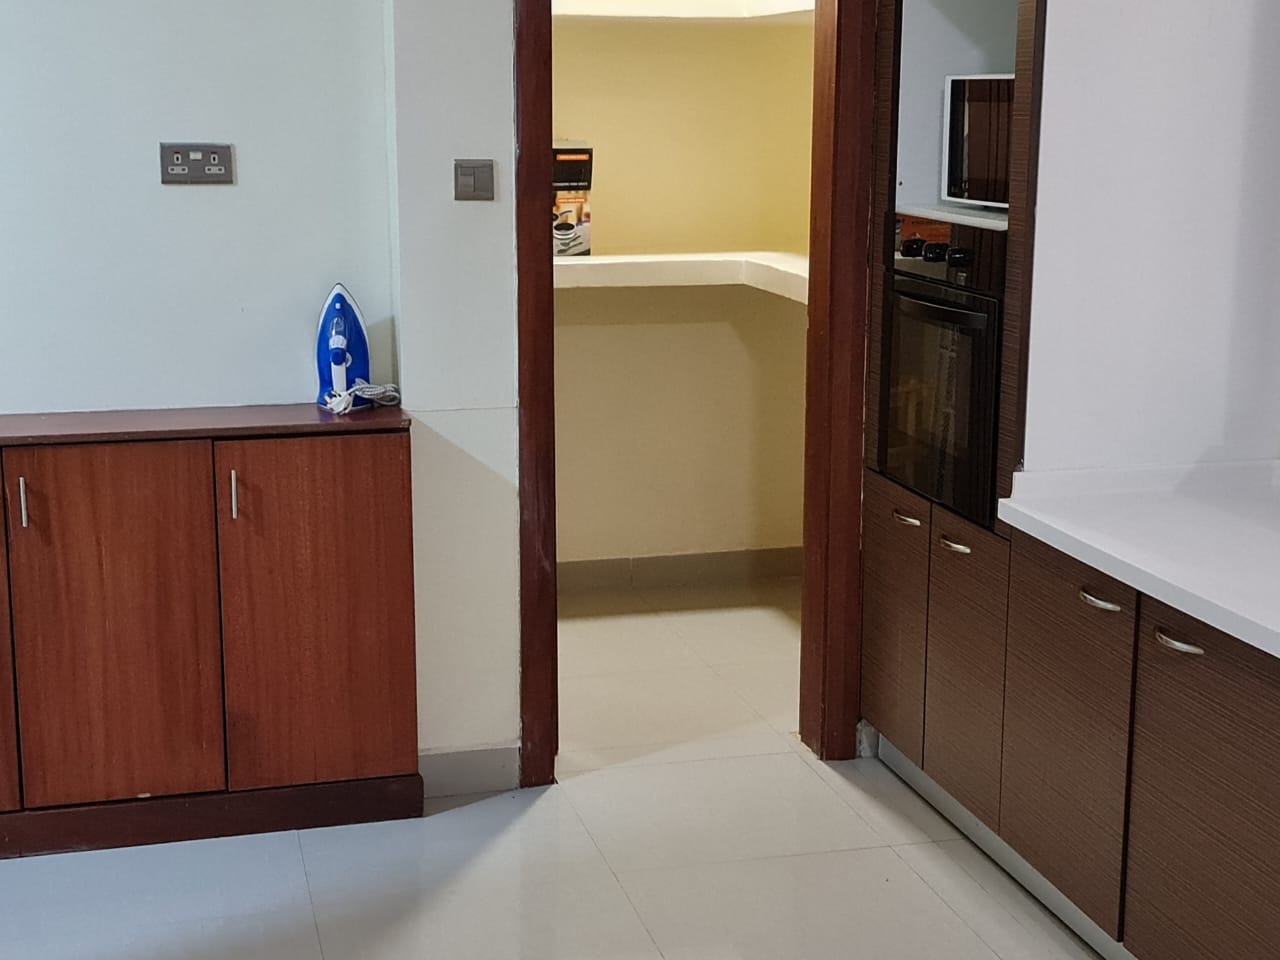 2 bedroom Apartment for rent at Ksh140k in kilimani with excellent amenities such as, pool, gym, borehole, lifts and more (17)